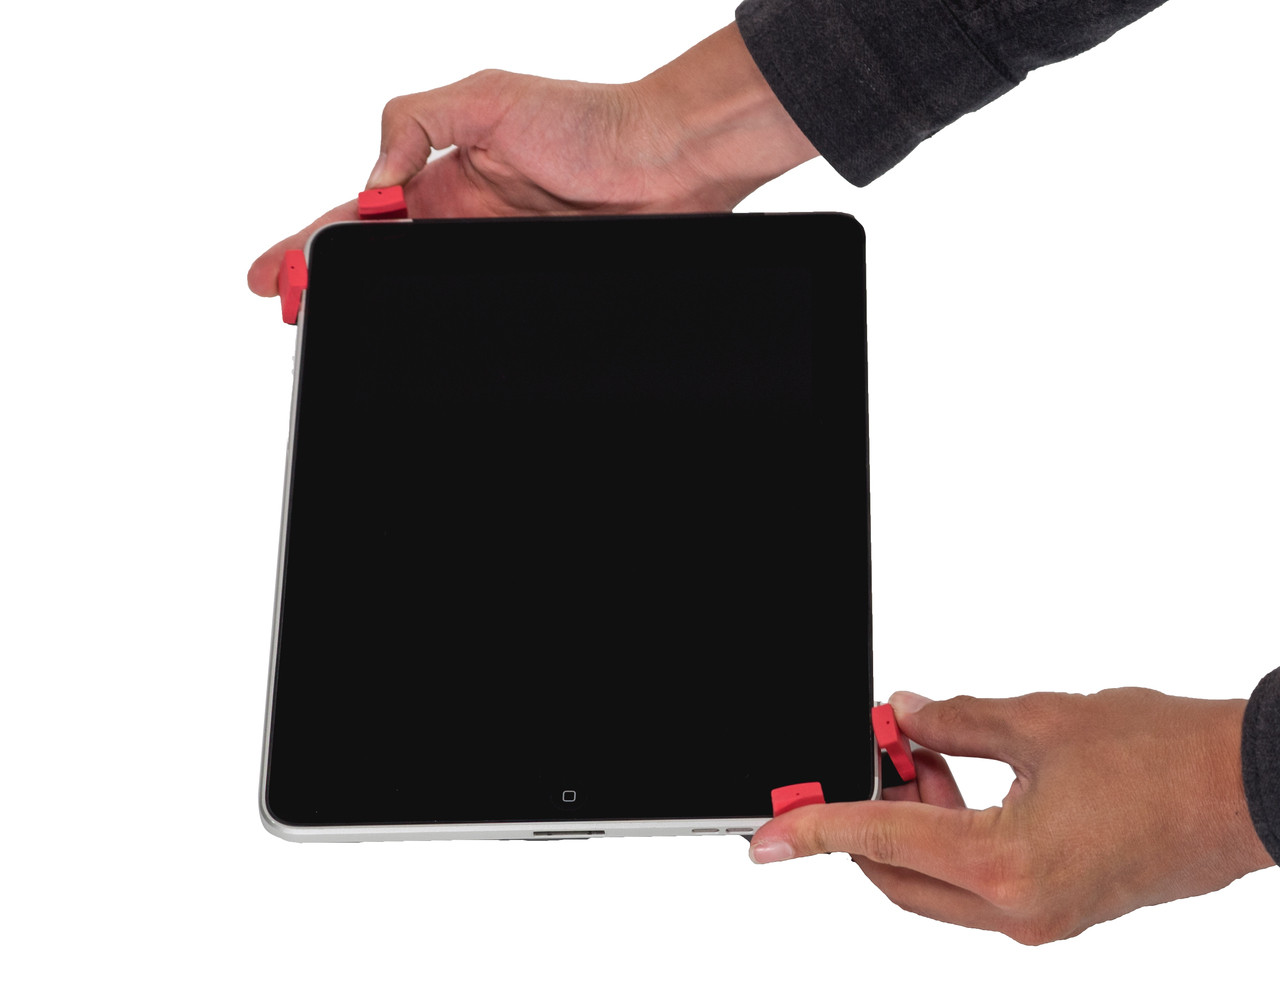 TabGrabber iPad Pro, Surface Pro, and Tablet Teleprompter Cradle - by PrompterPeople